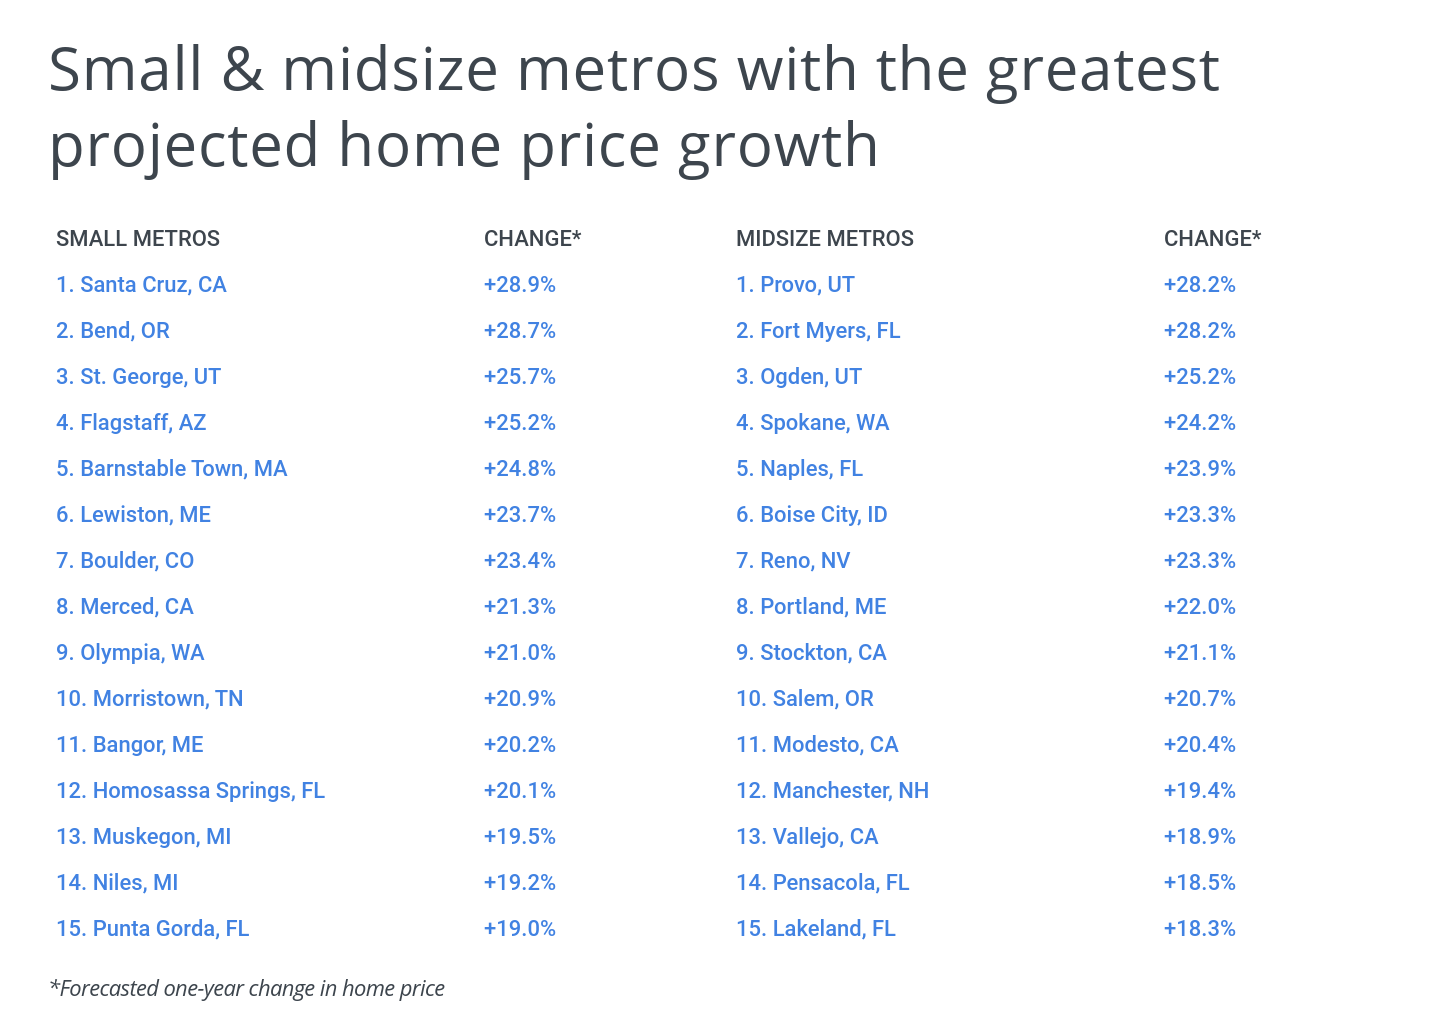 Small and midsize metros with the greatest projected home price growth